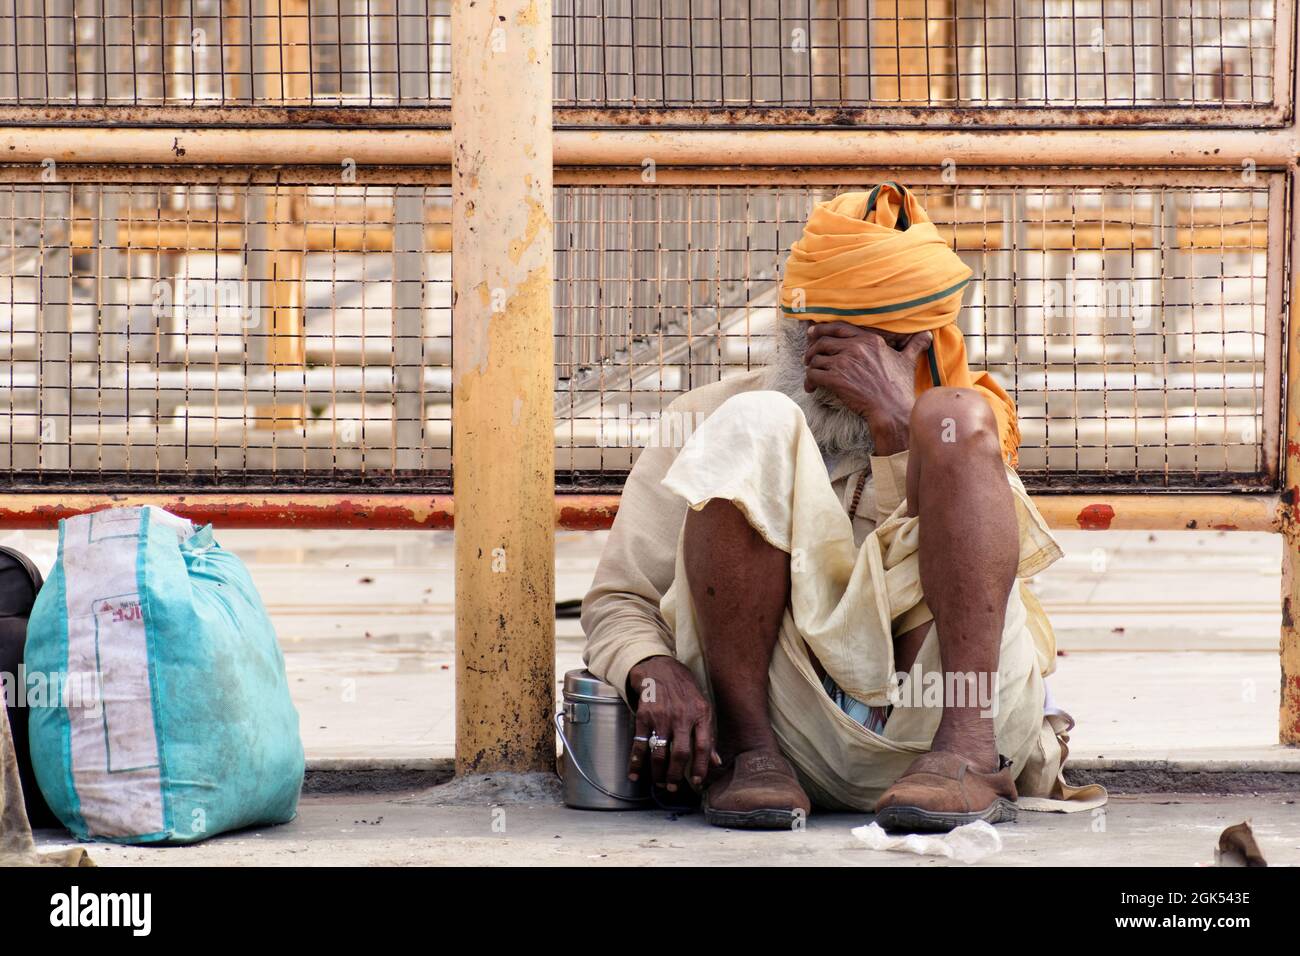 Orchha, Madhya Pradesh, India - March 2019: An aged Indian man wearing an orange turban sitting sad and worried outside the fences of a Hindu temple i Stock Photo